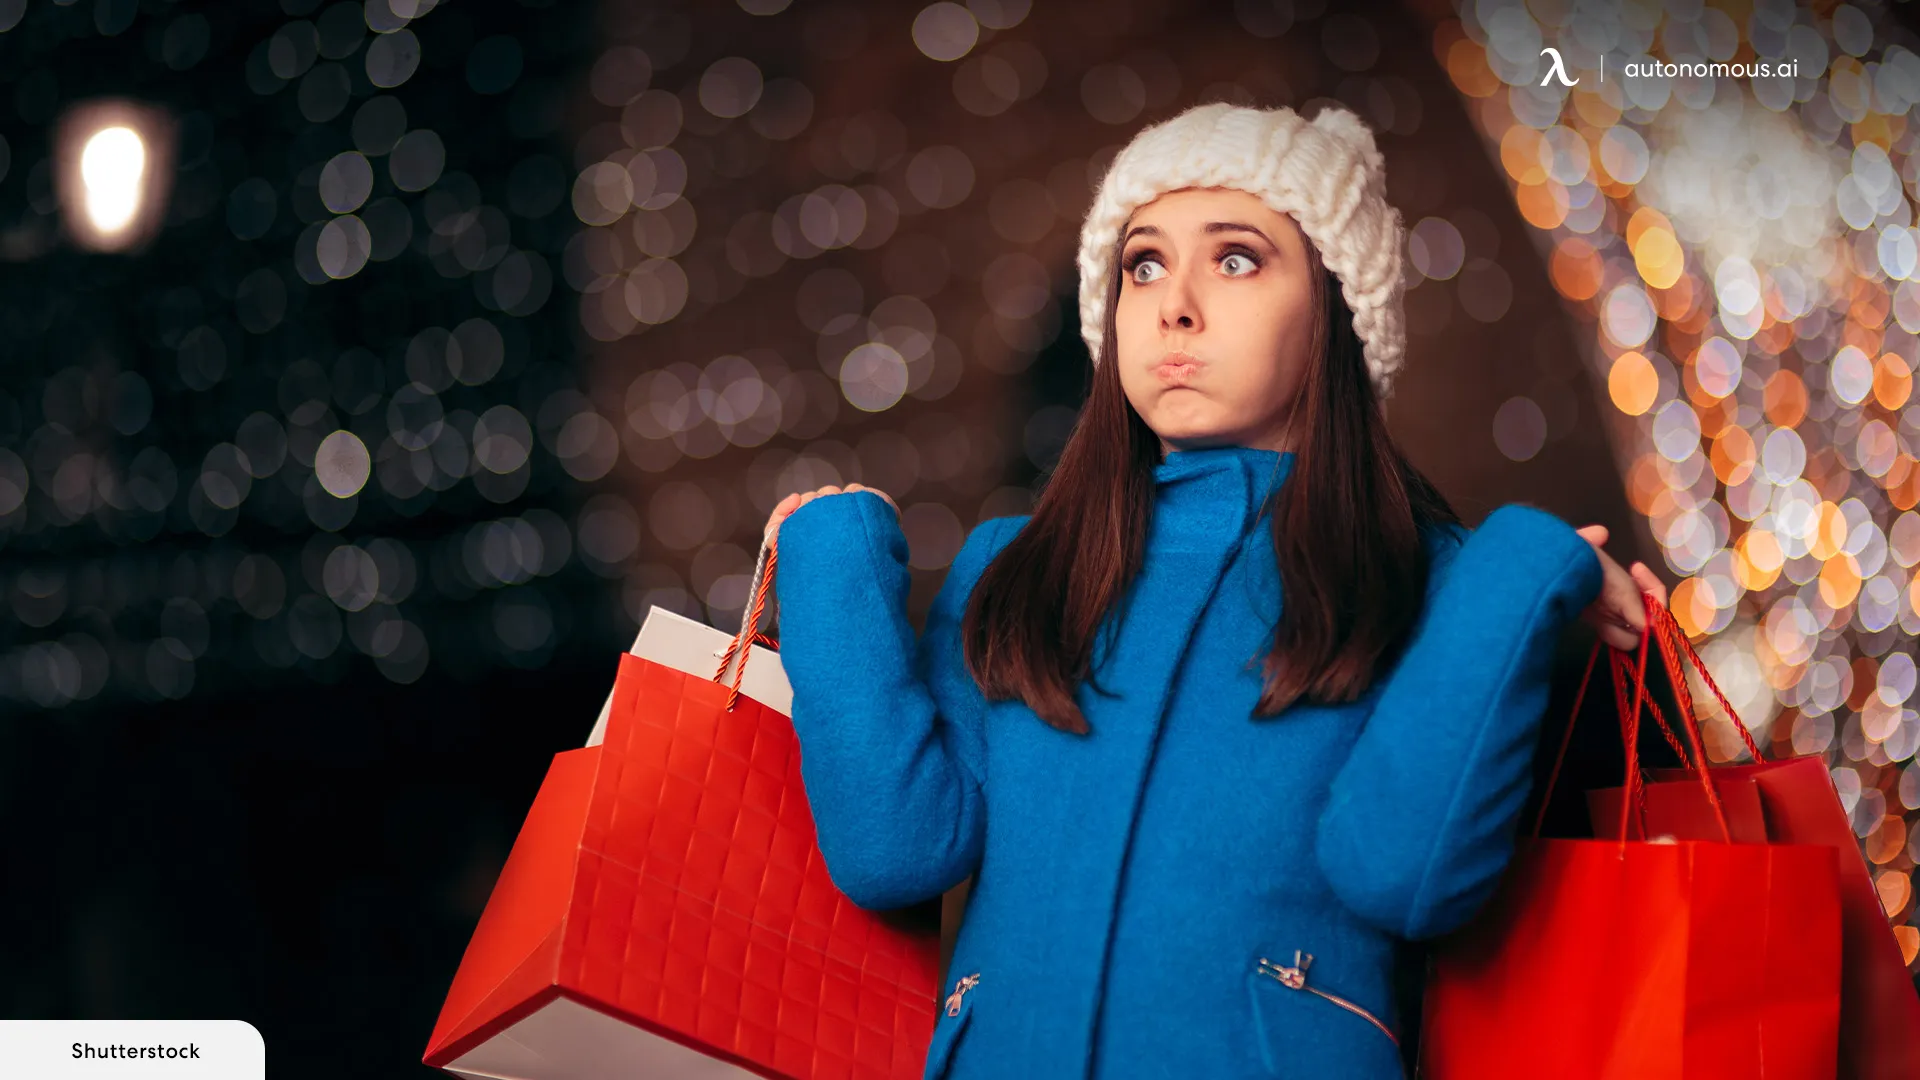 Why Is Christmas Shopping So Stressful?